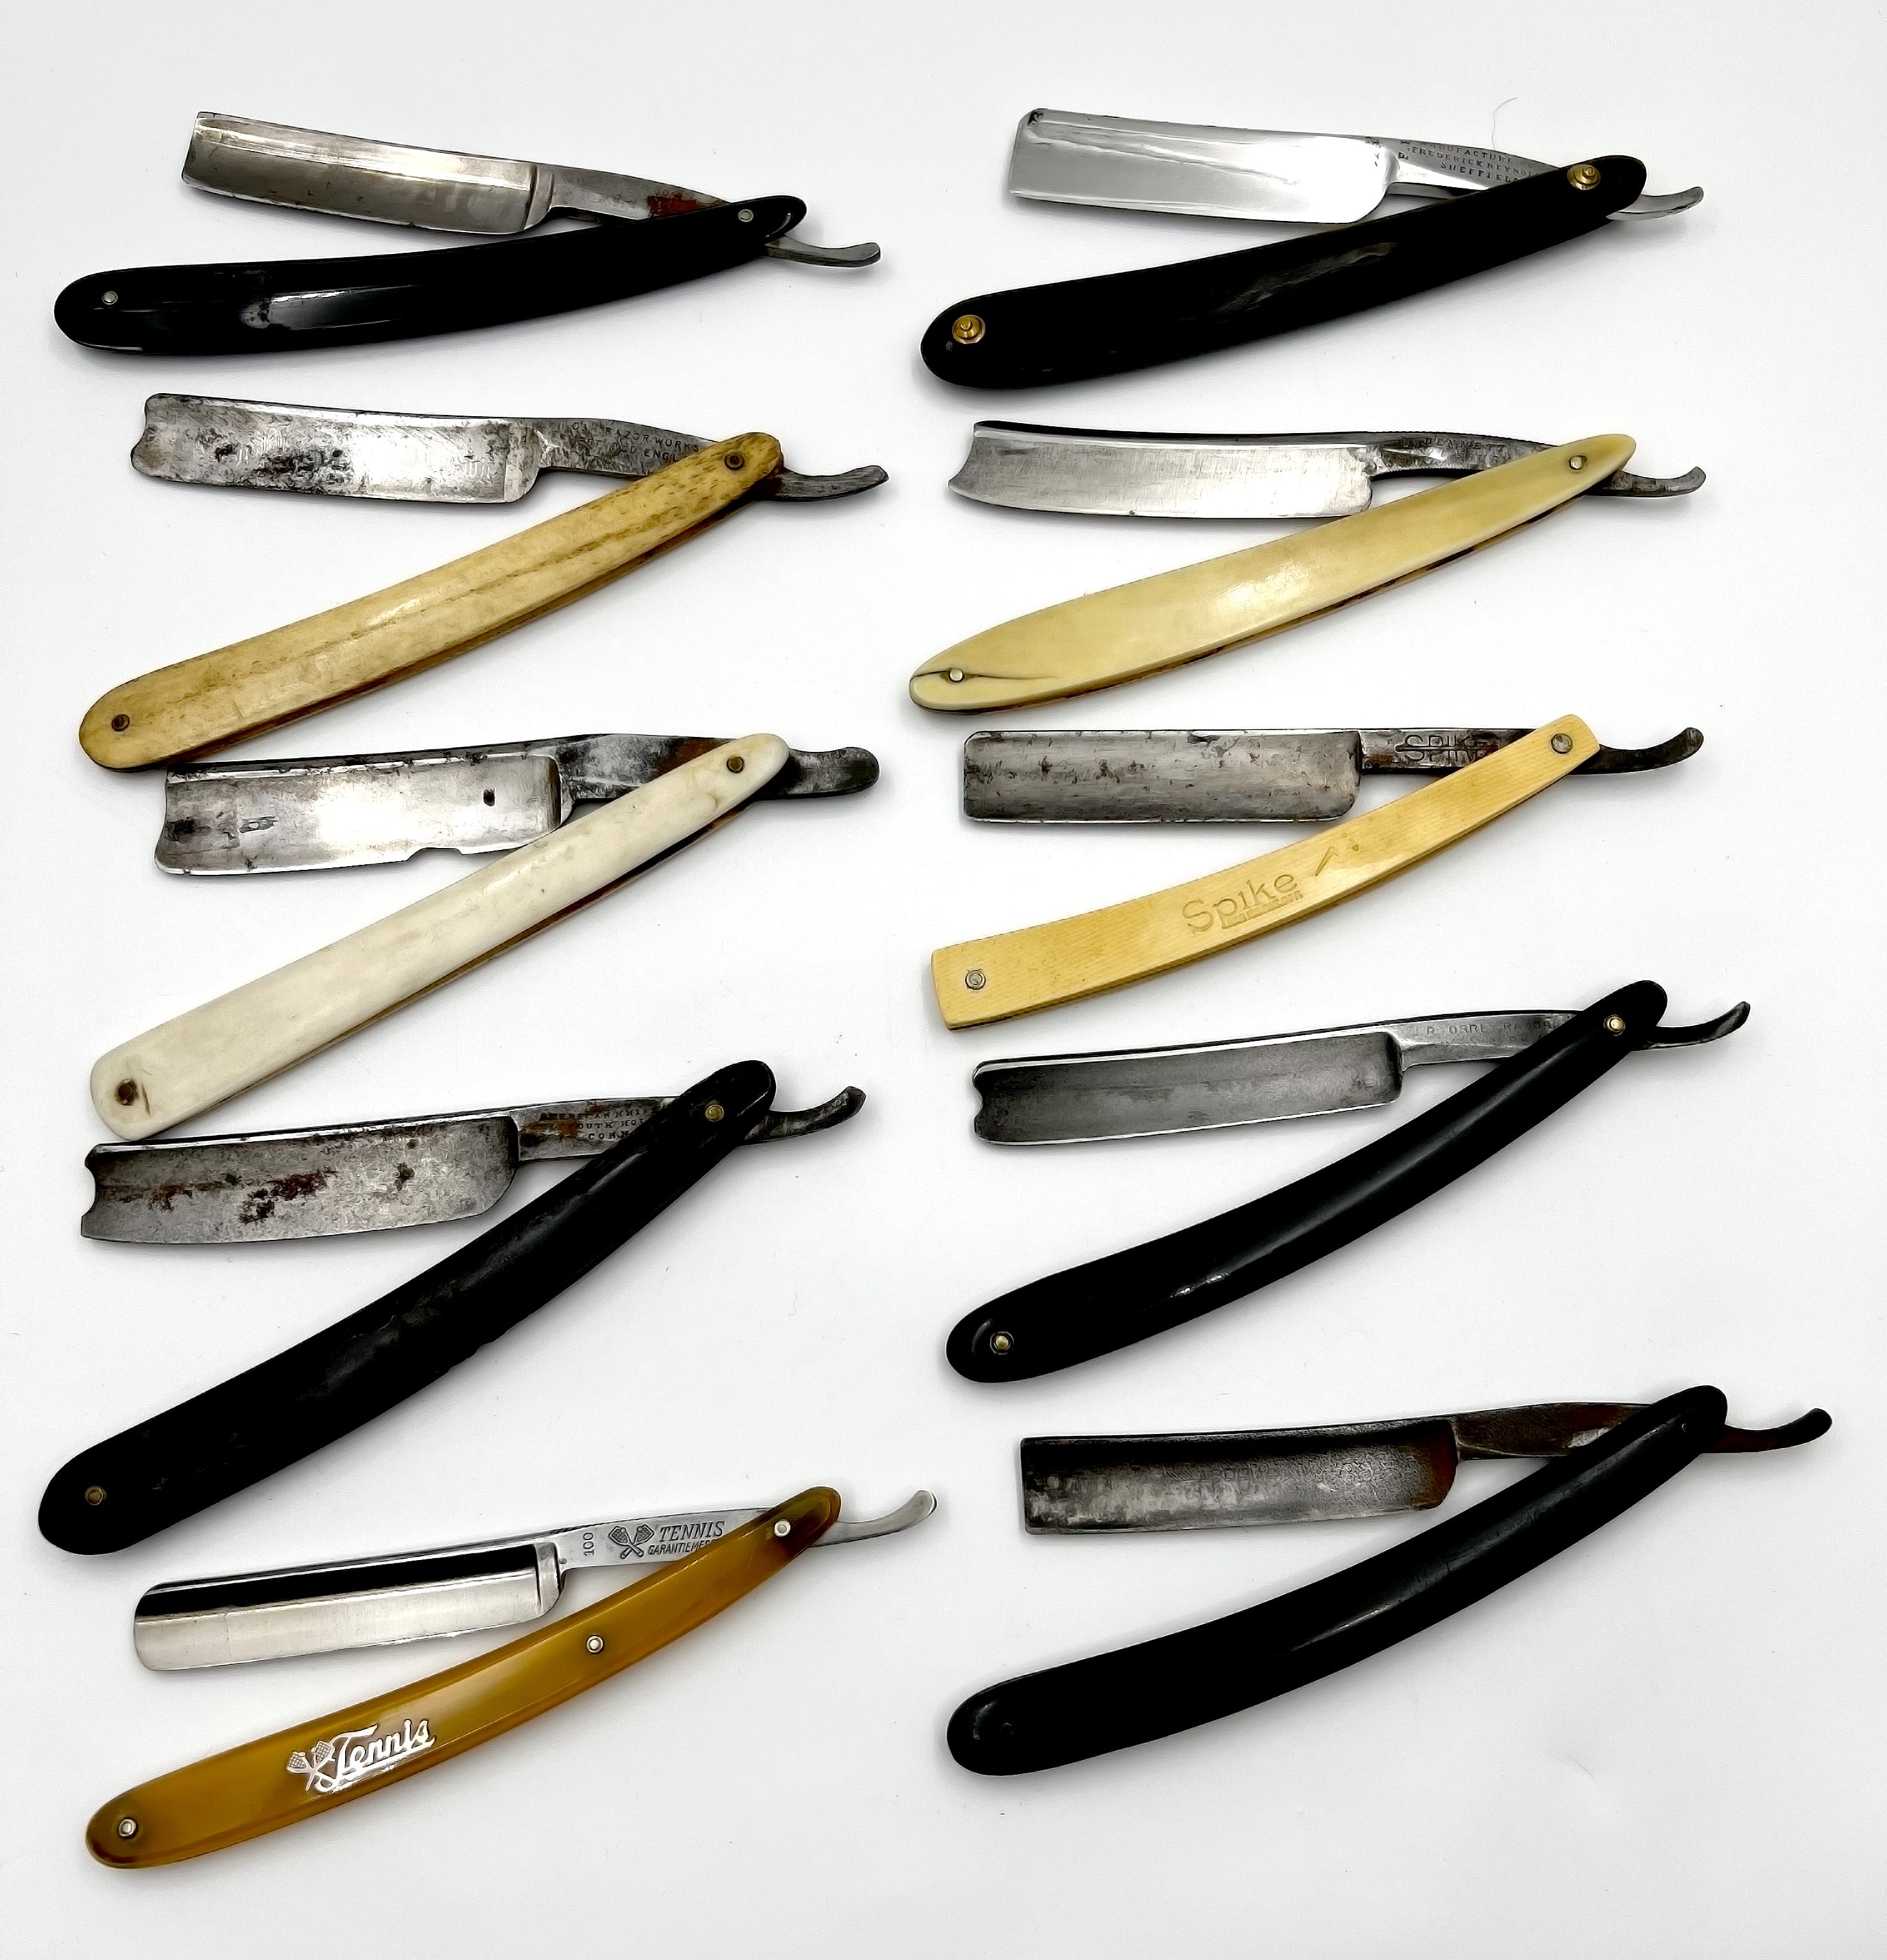 Vintage 10 Straight Razor Lot #33 - May Contain Sheffield, Solingen & USA makers, as pictured